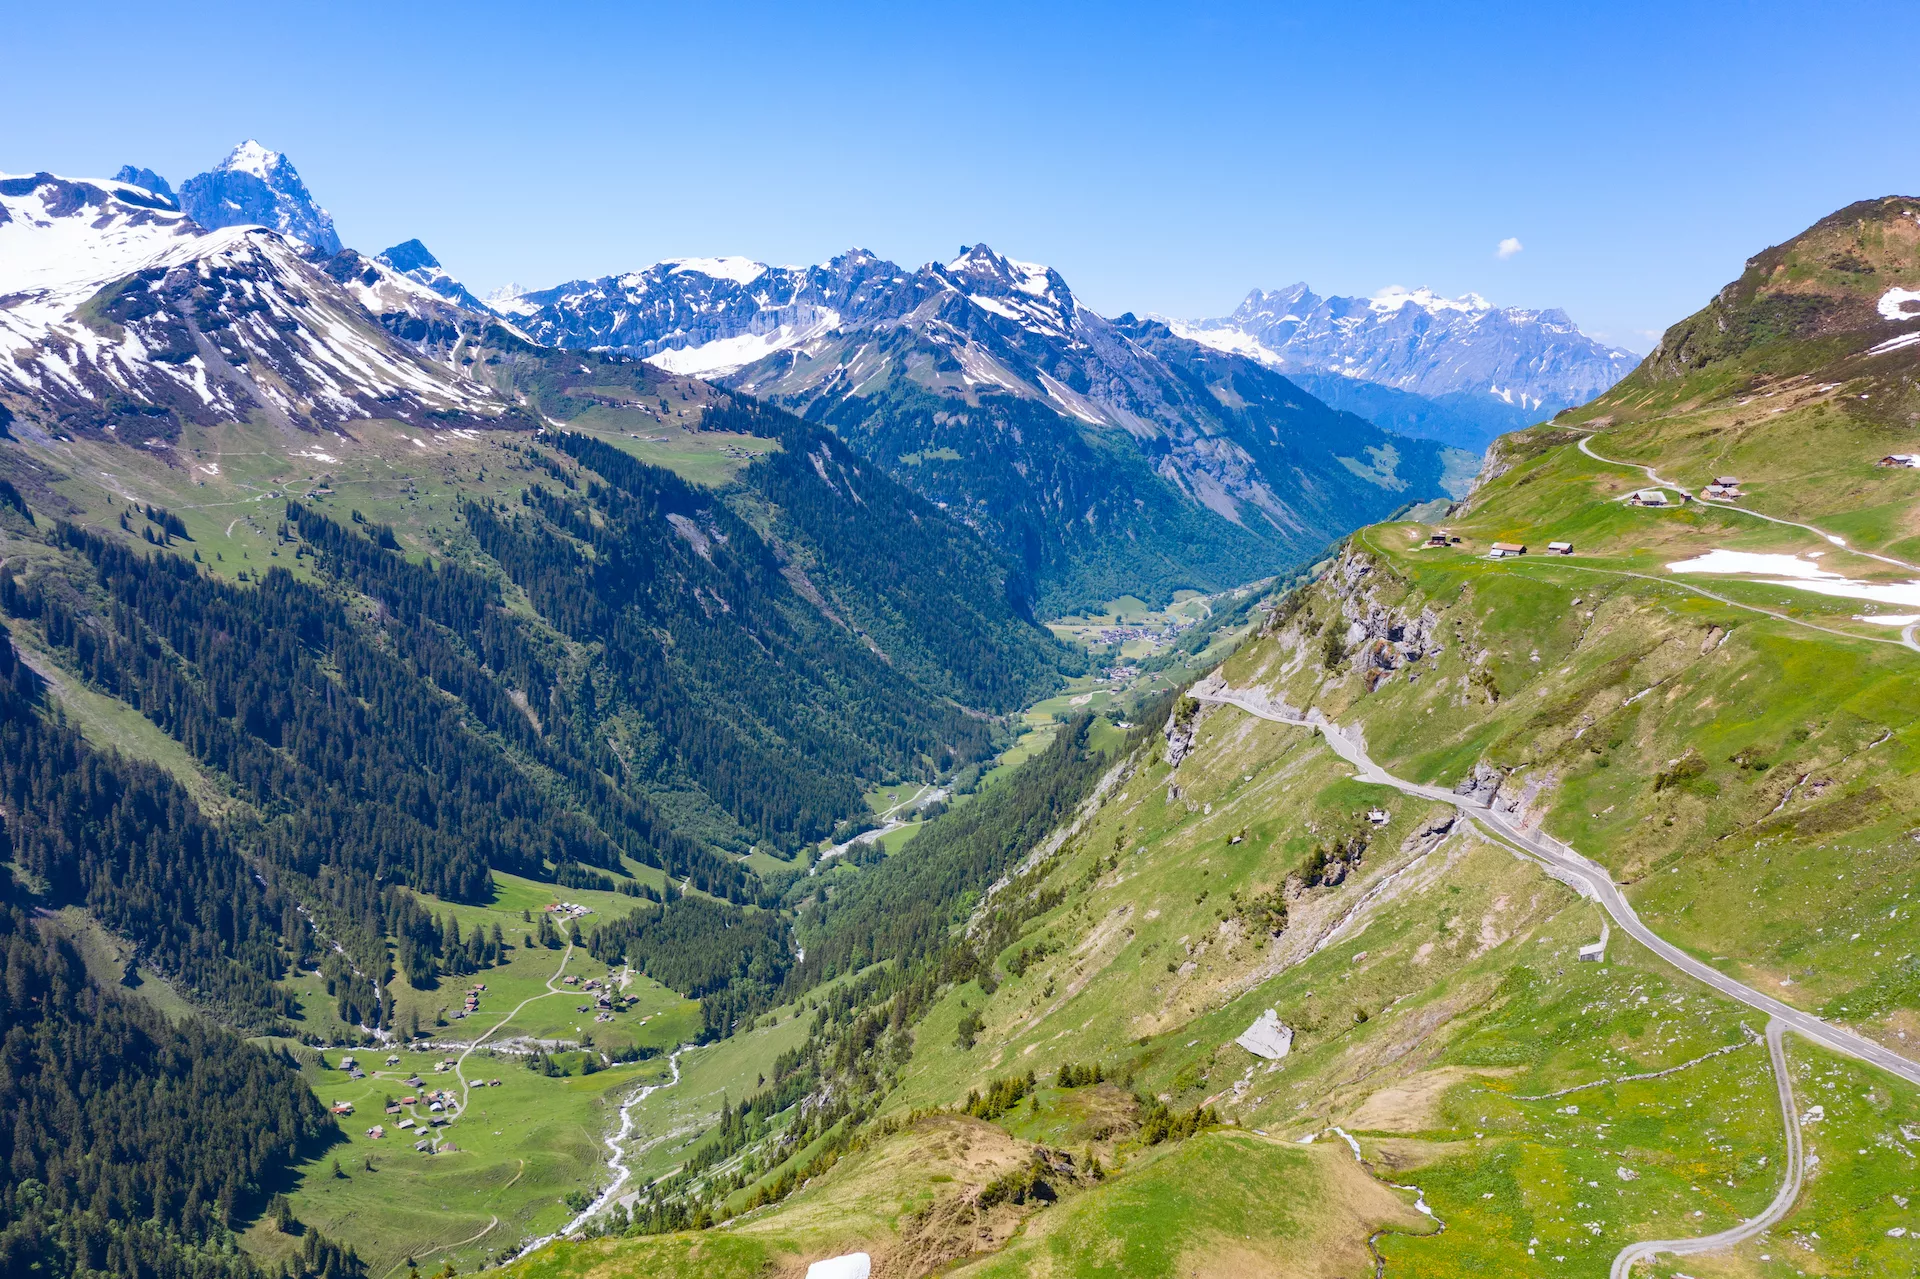 Klausenpass mountain road connecting cantons Uri and Glarus